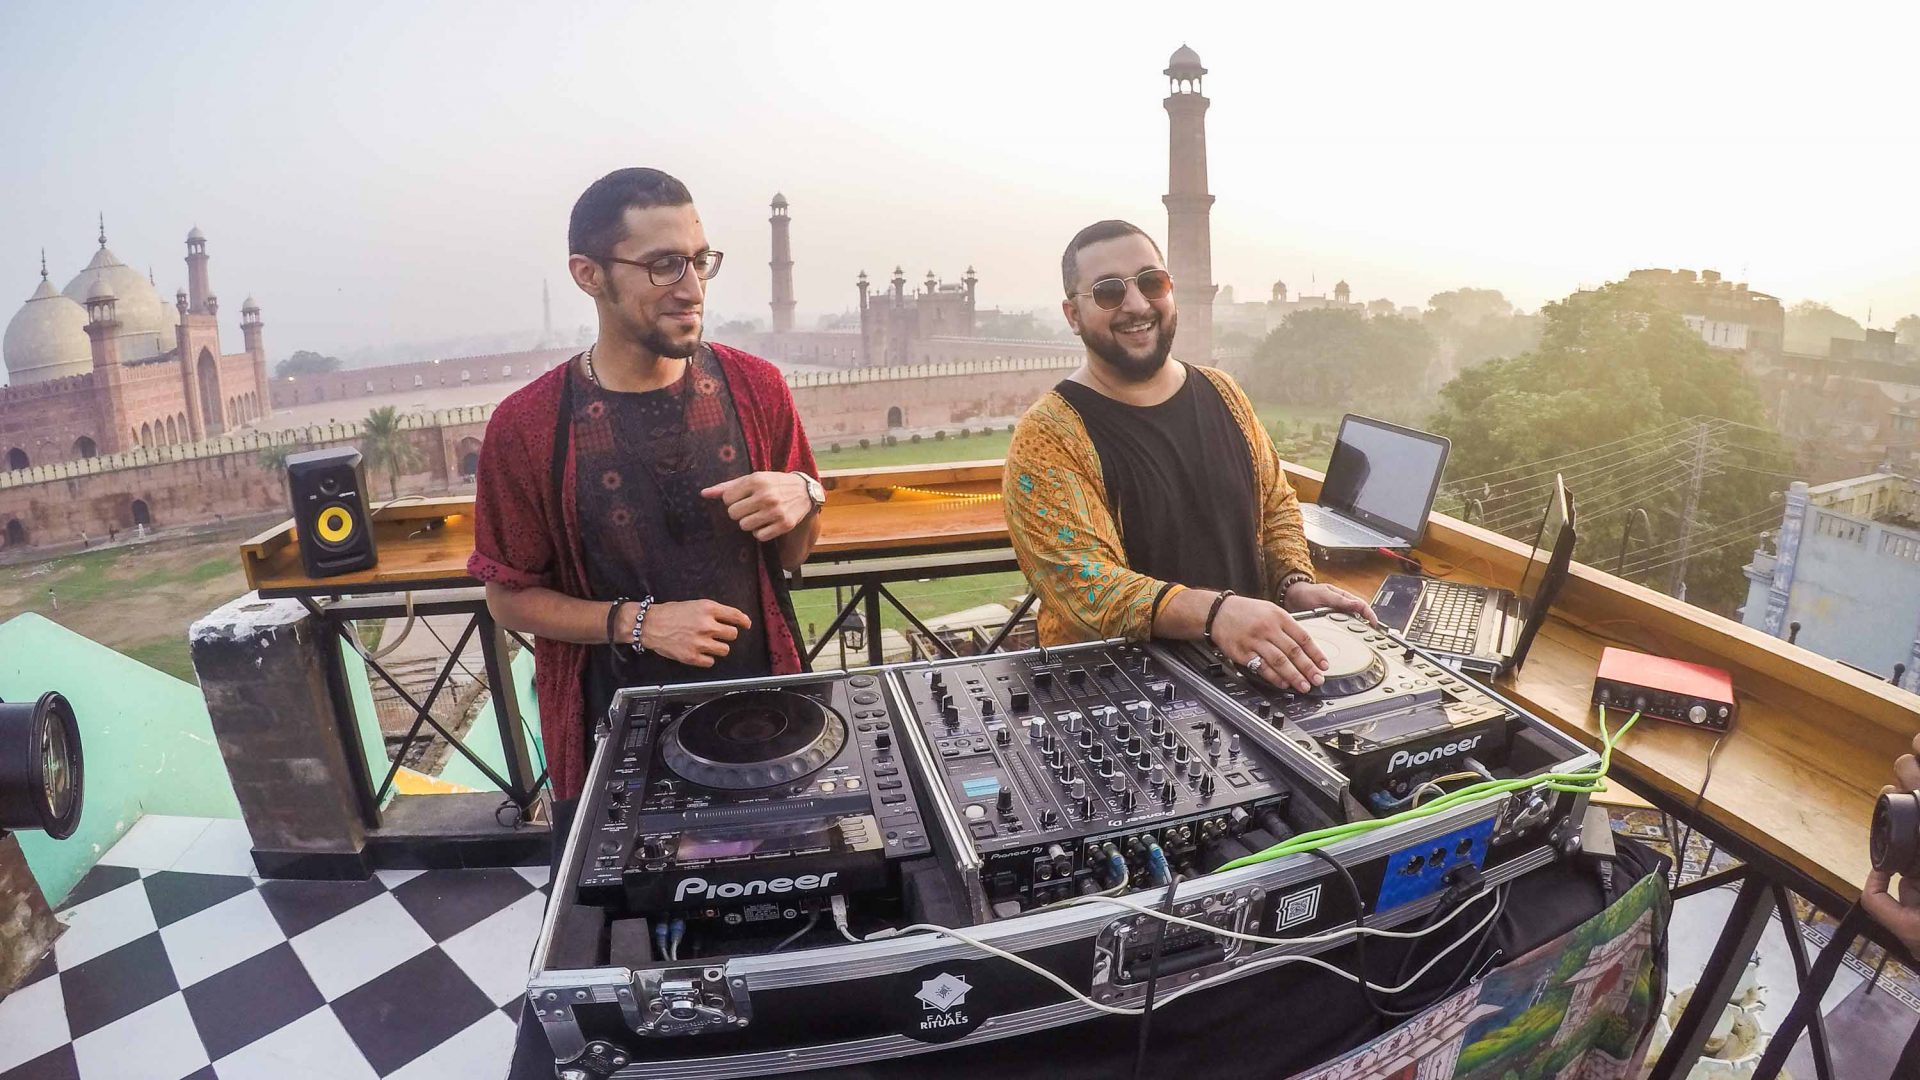 House music in Pakistan? Meet the innovators cranking up the volume